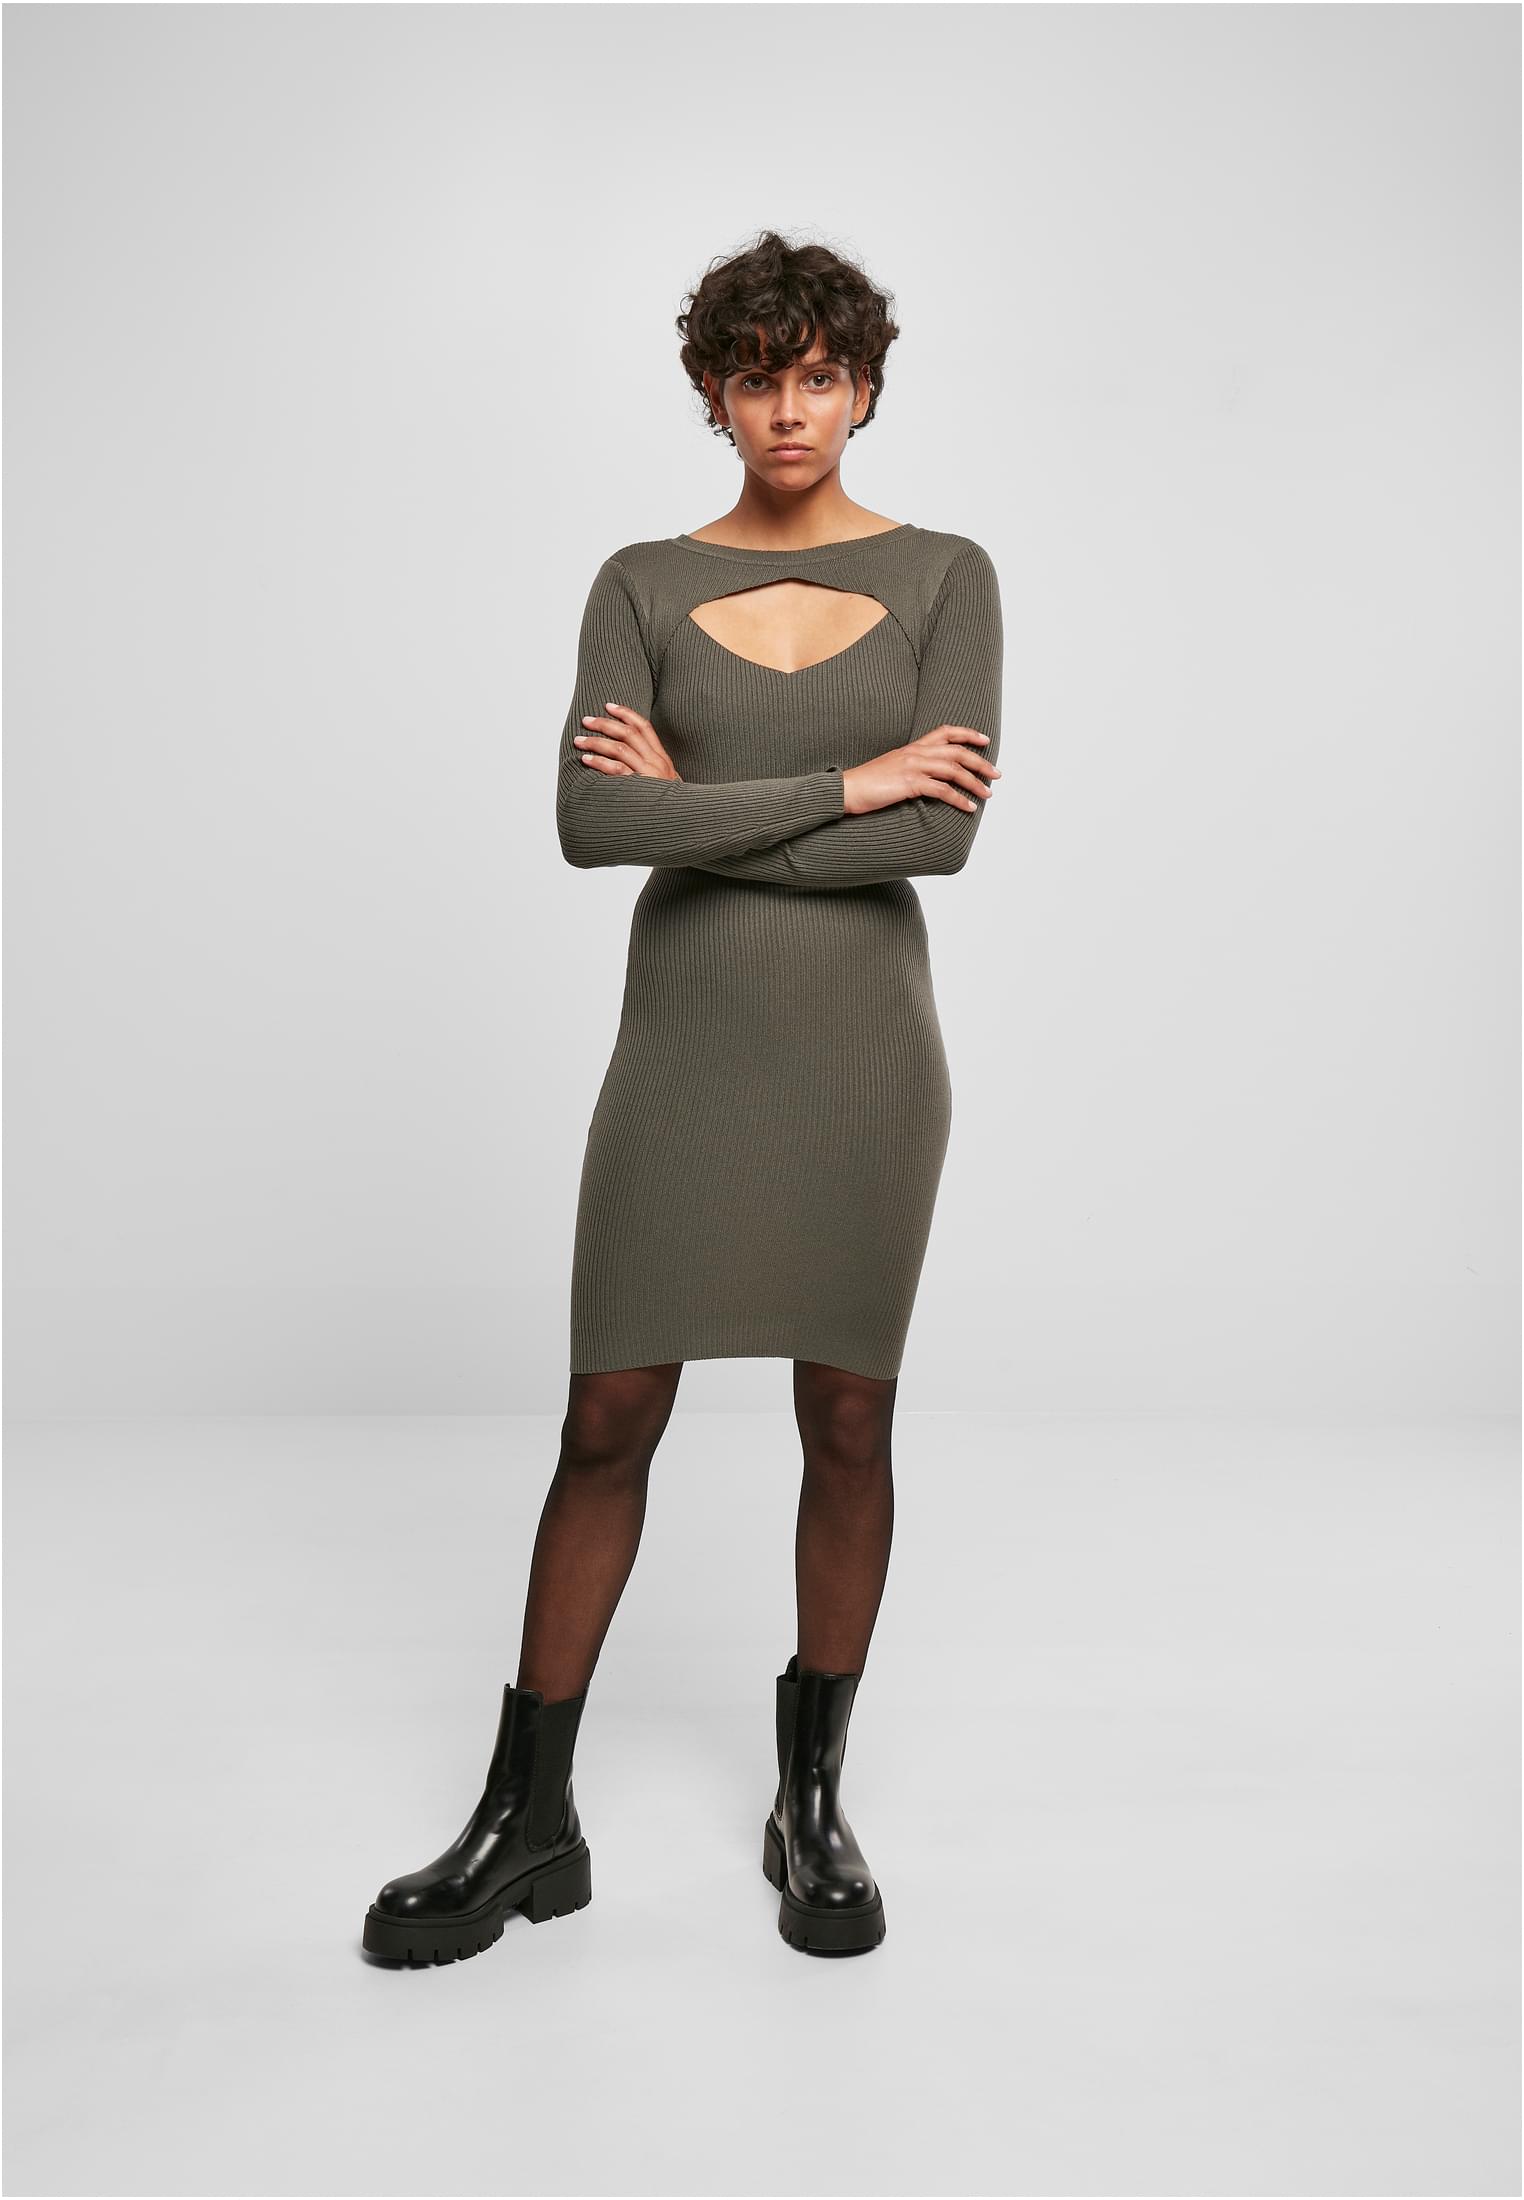 Damen Ladies Cut Out Dress in Farbe olive